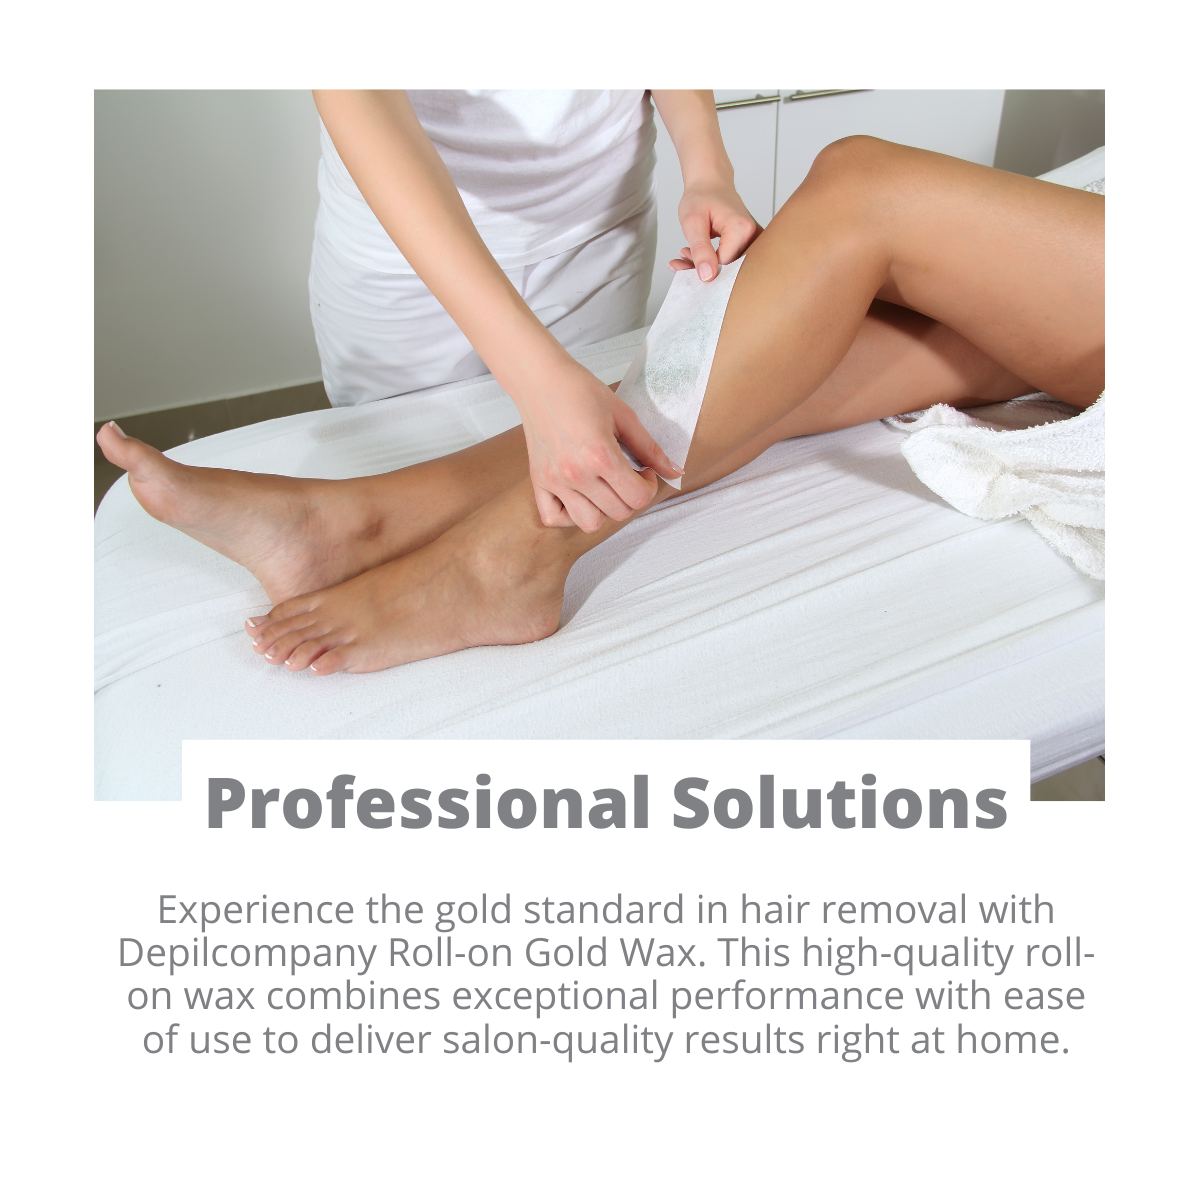 Professional hair removal solutions with Roll-on Gold wax, 6 units